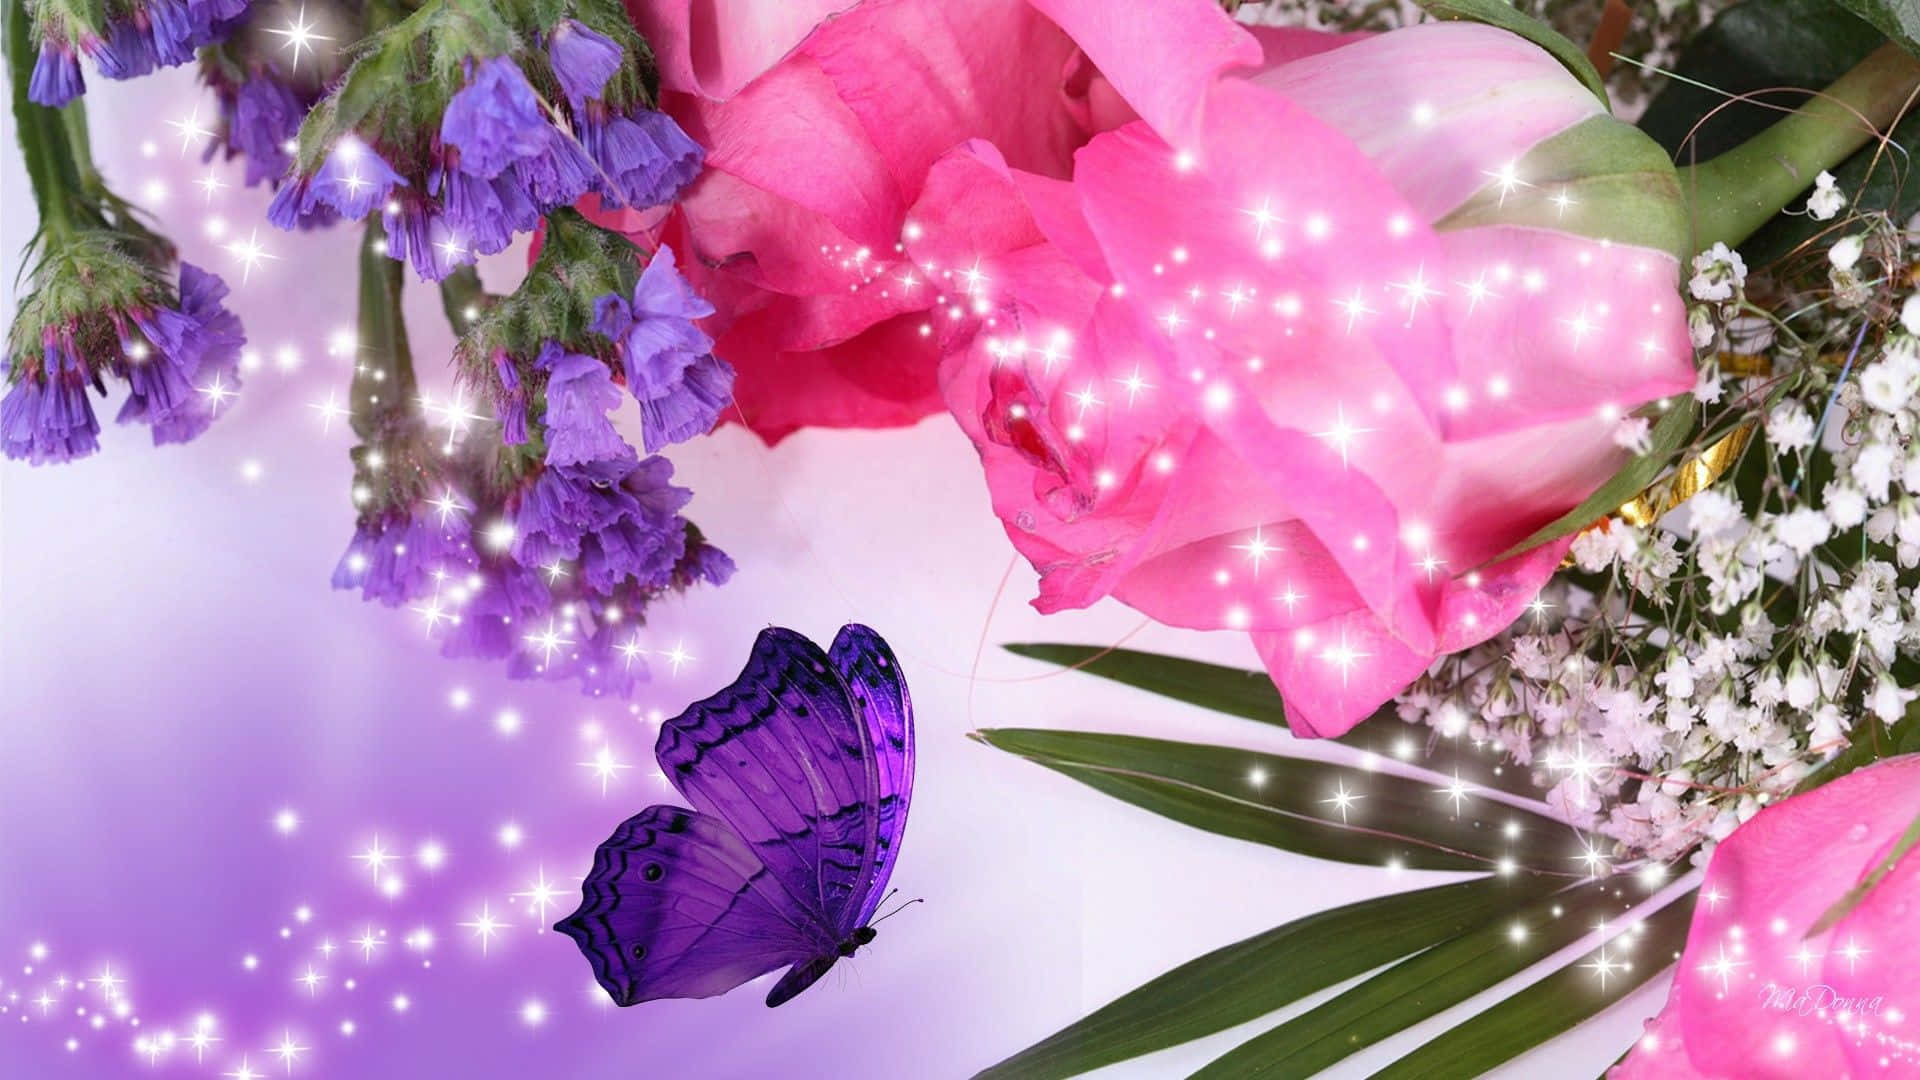 A Purple Flower With A Butterfly And Some Sparkles